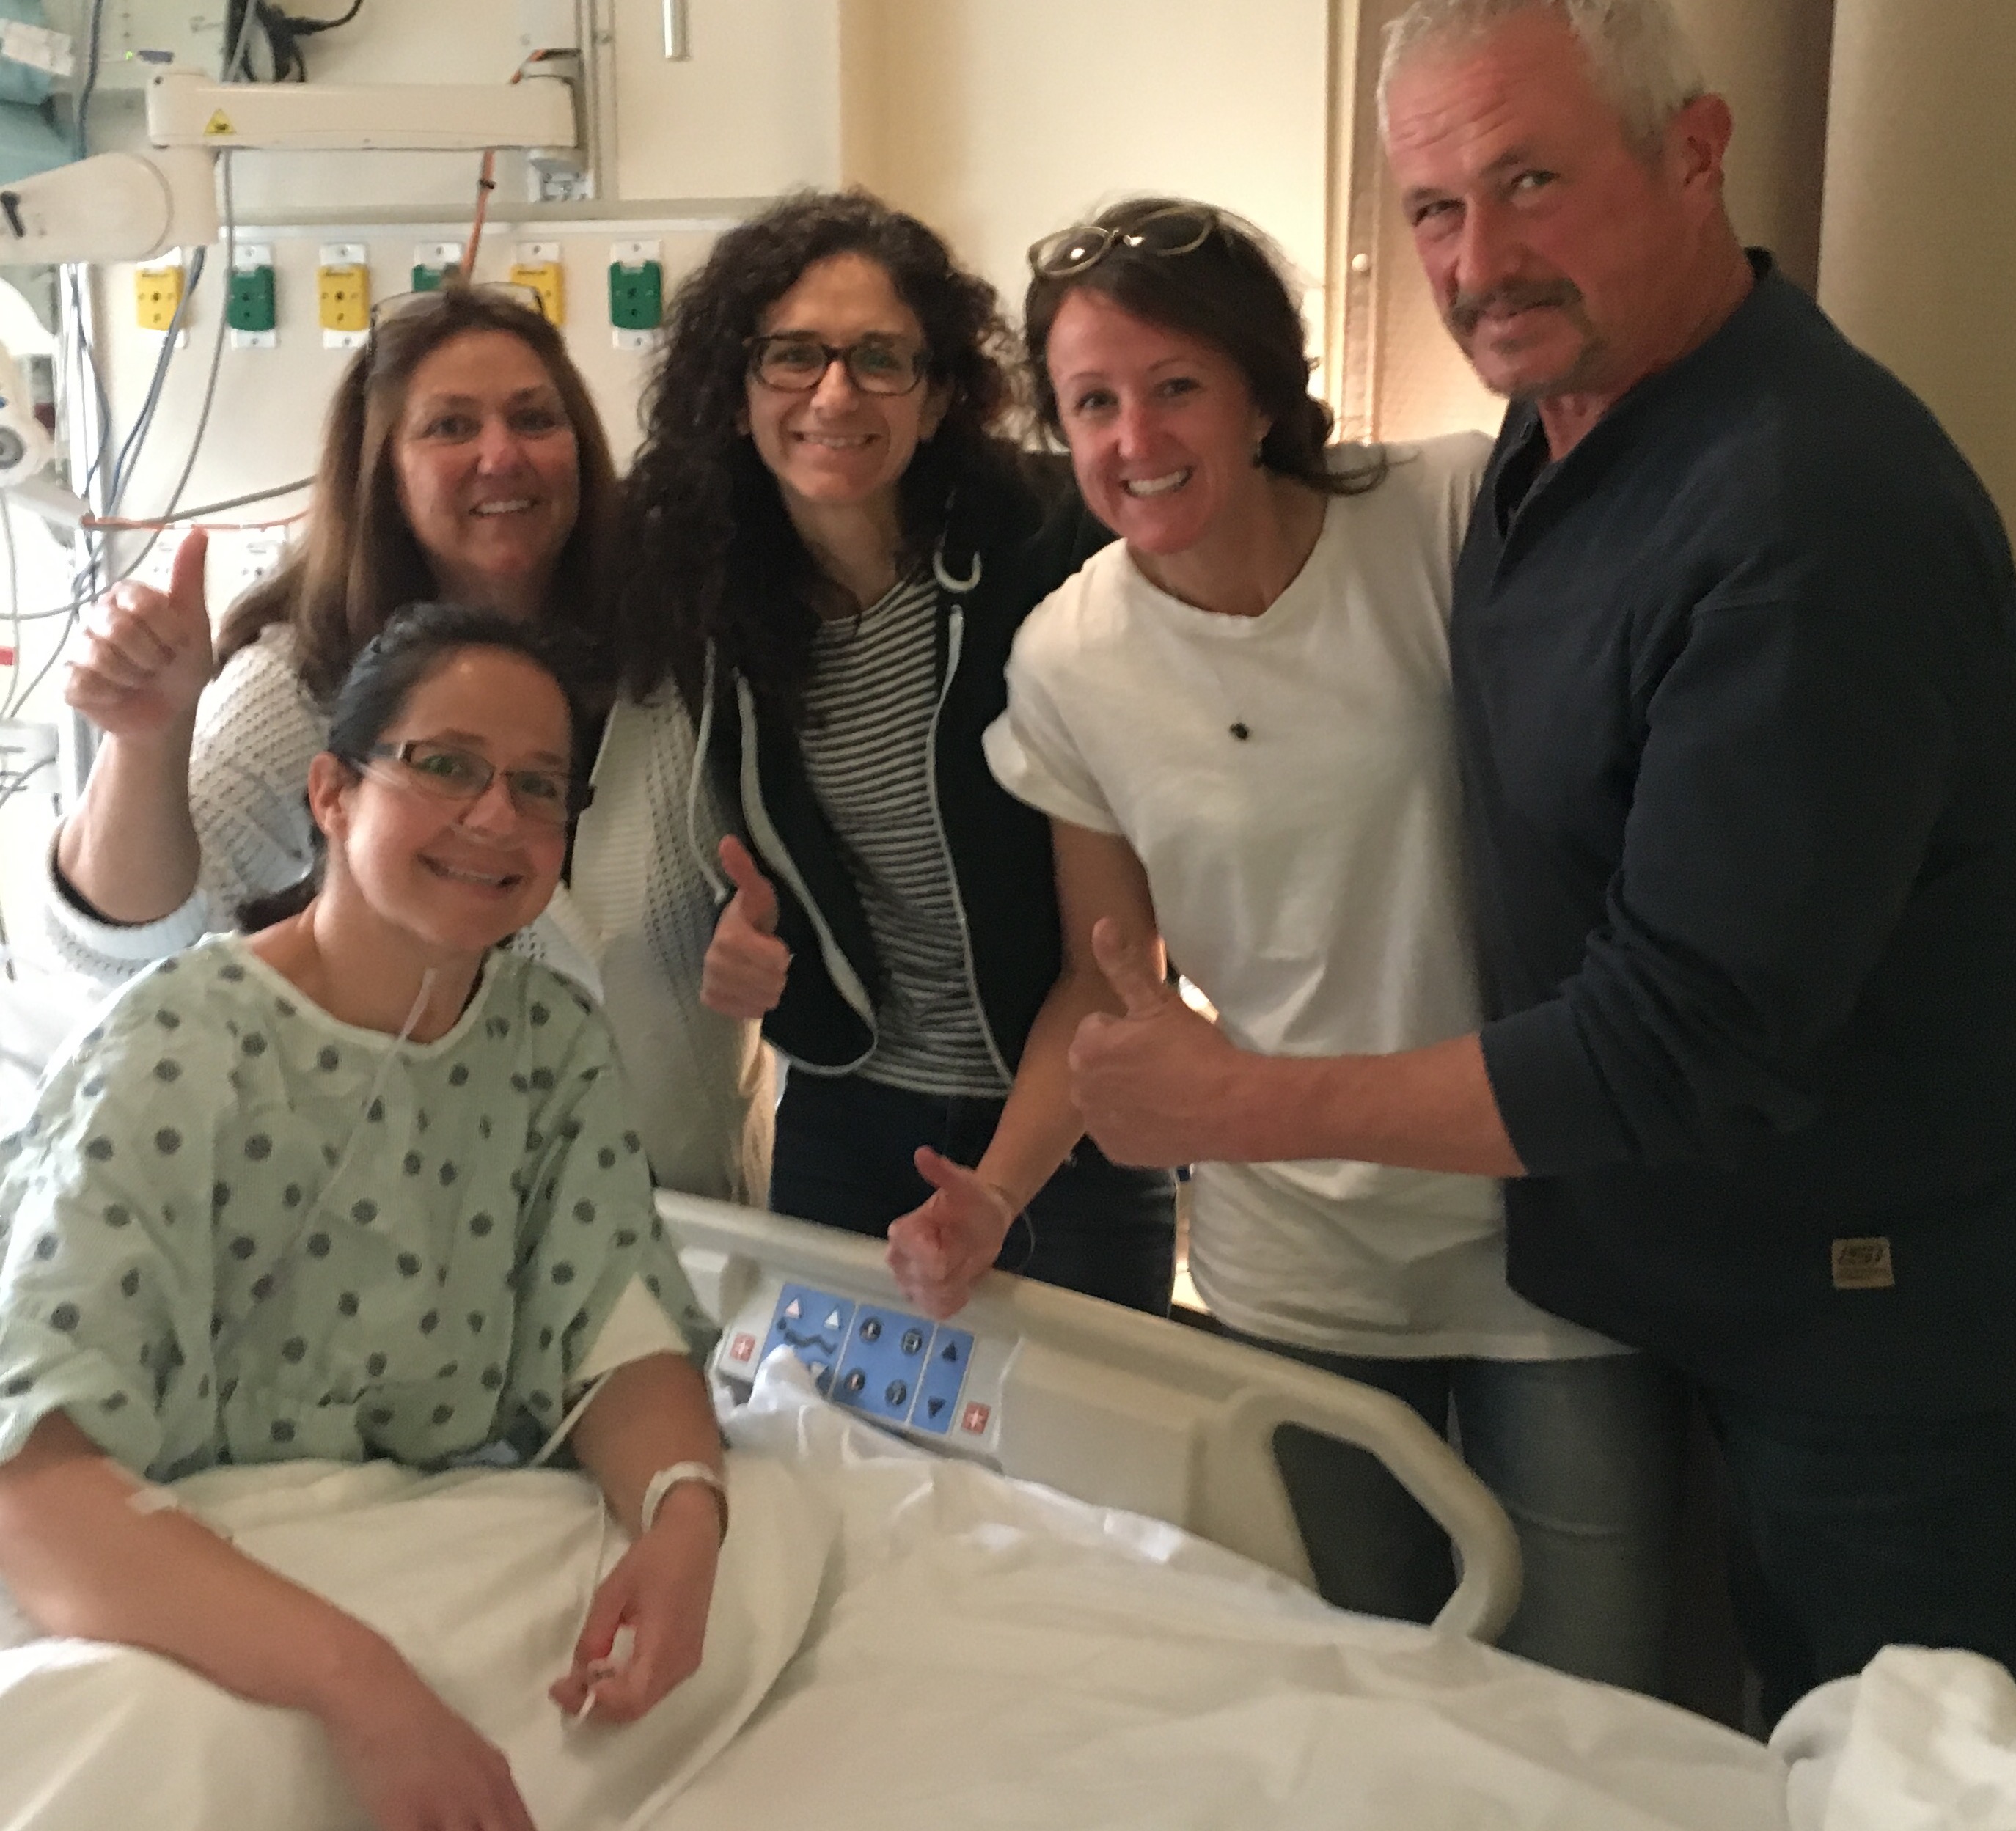 Erika Todd with family around a hospital bed